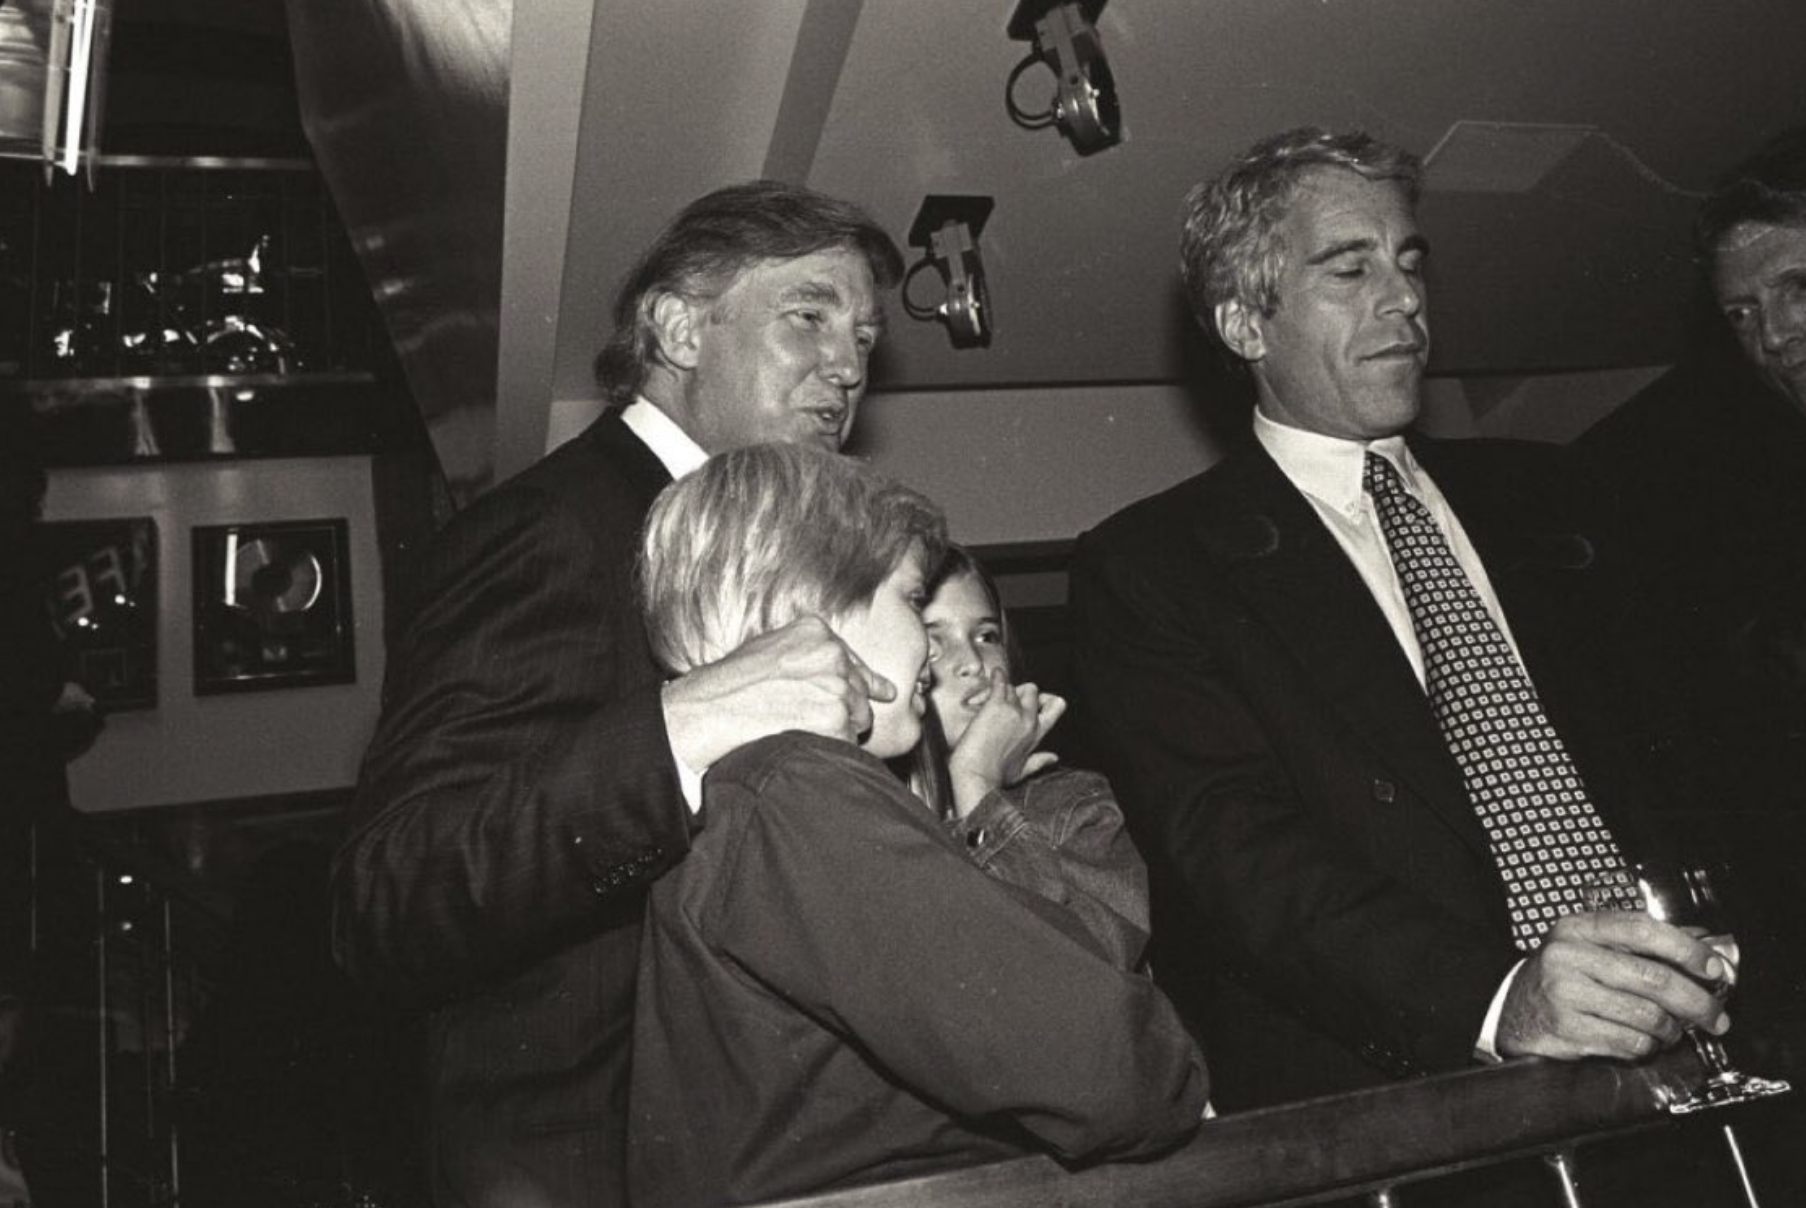 Donald Trump with children Eric and Ivanka in the company of Jeffrey Epstein